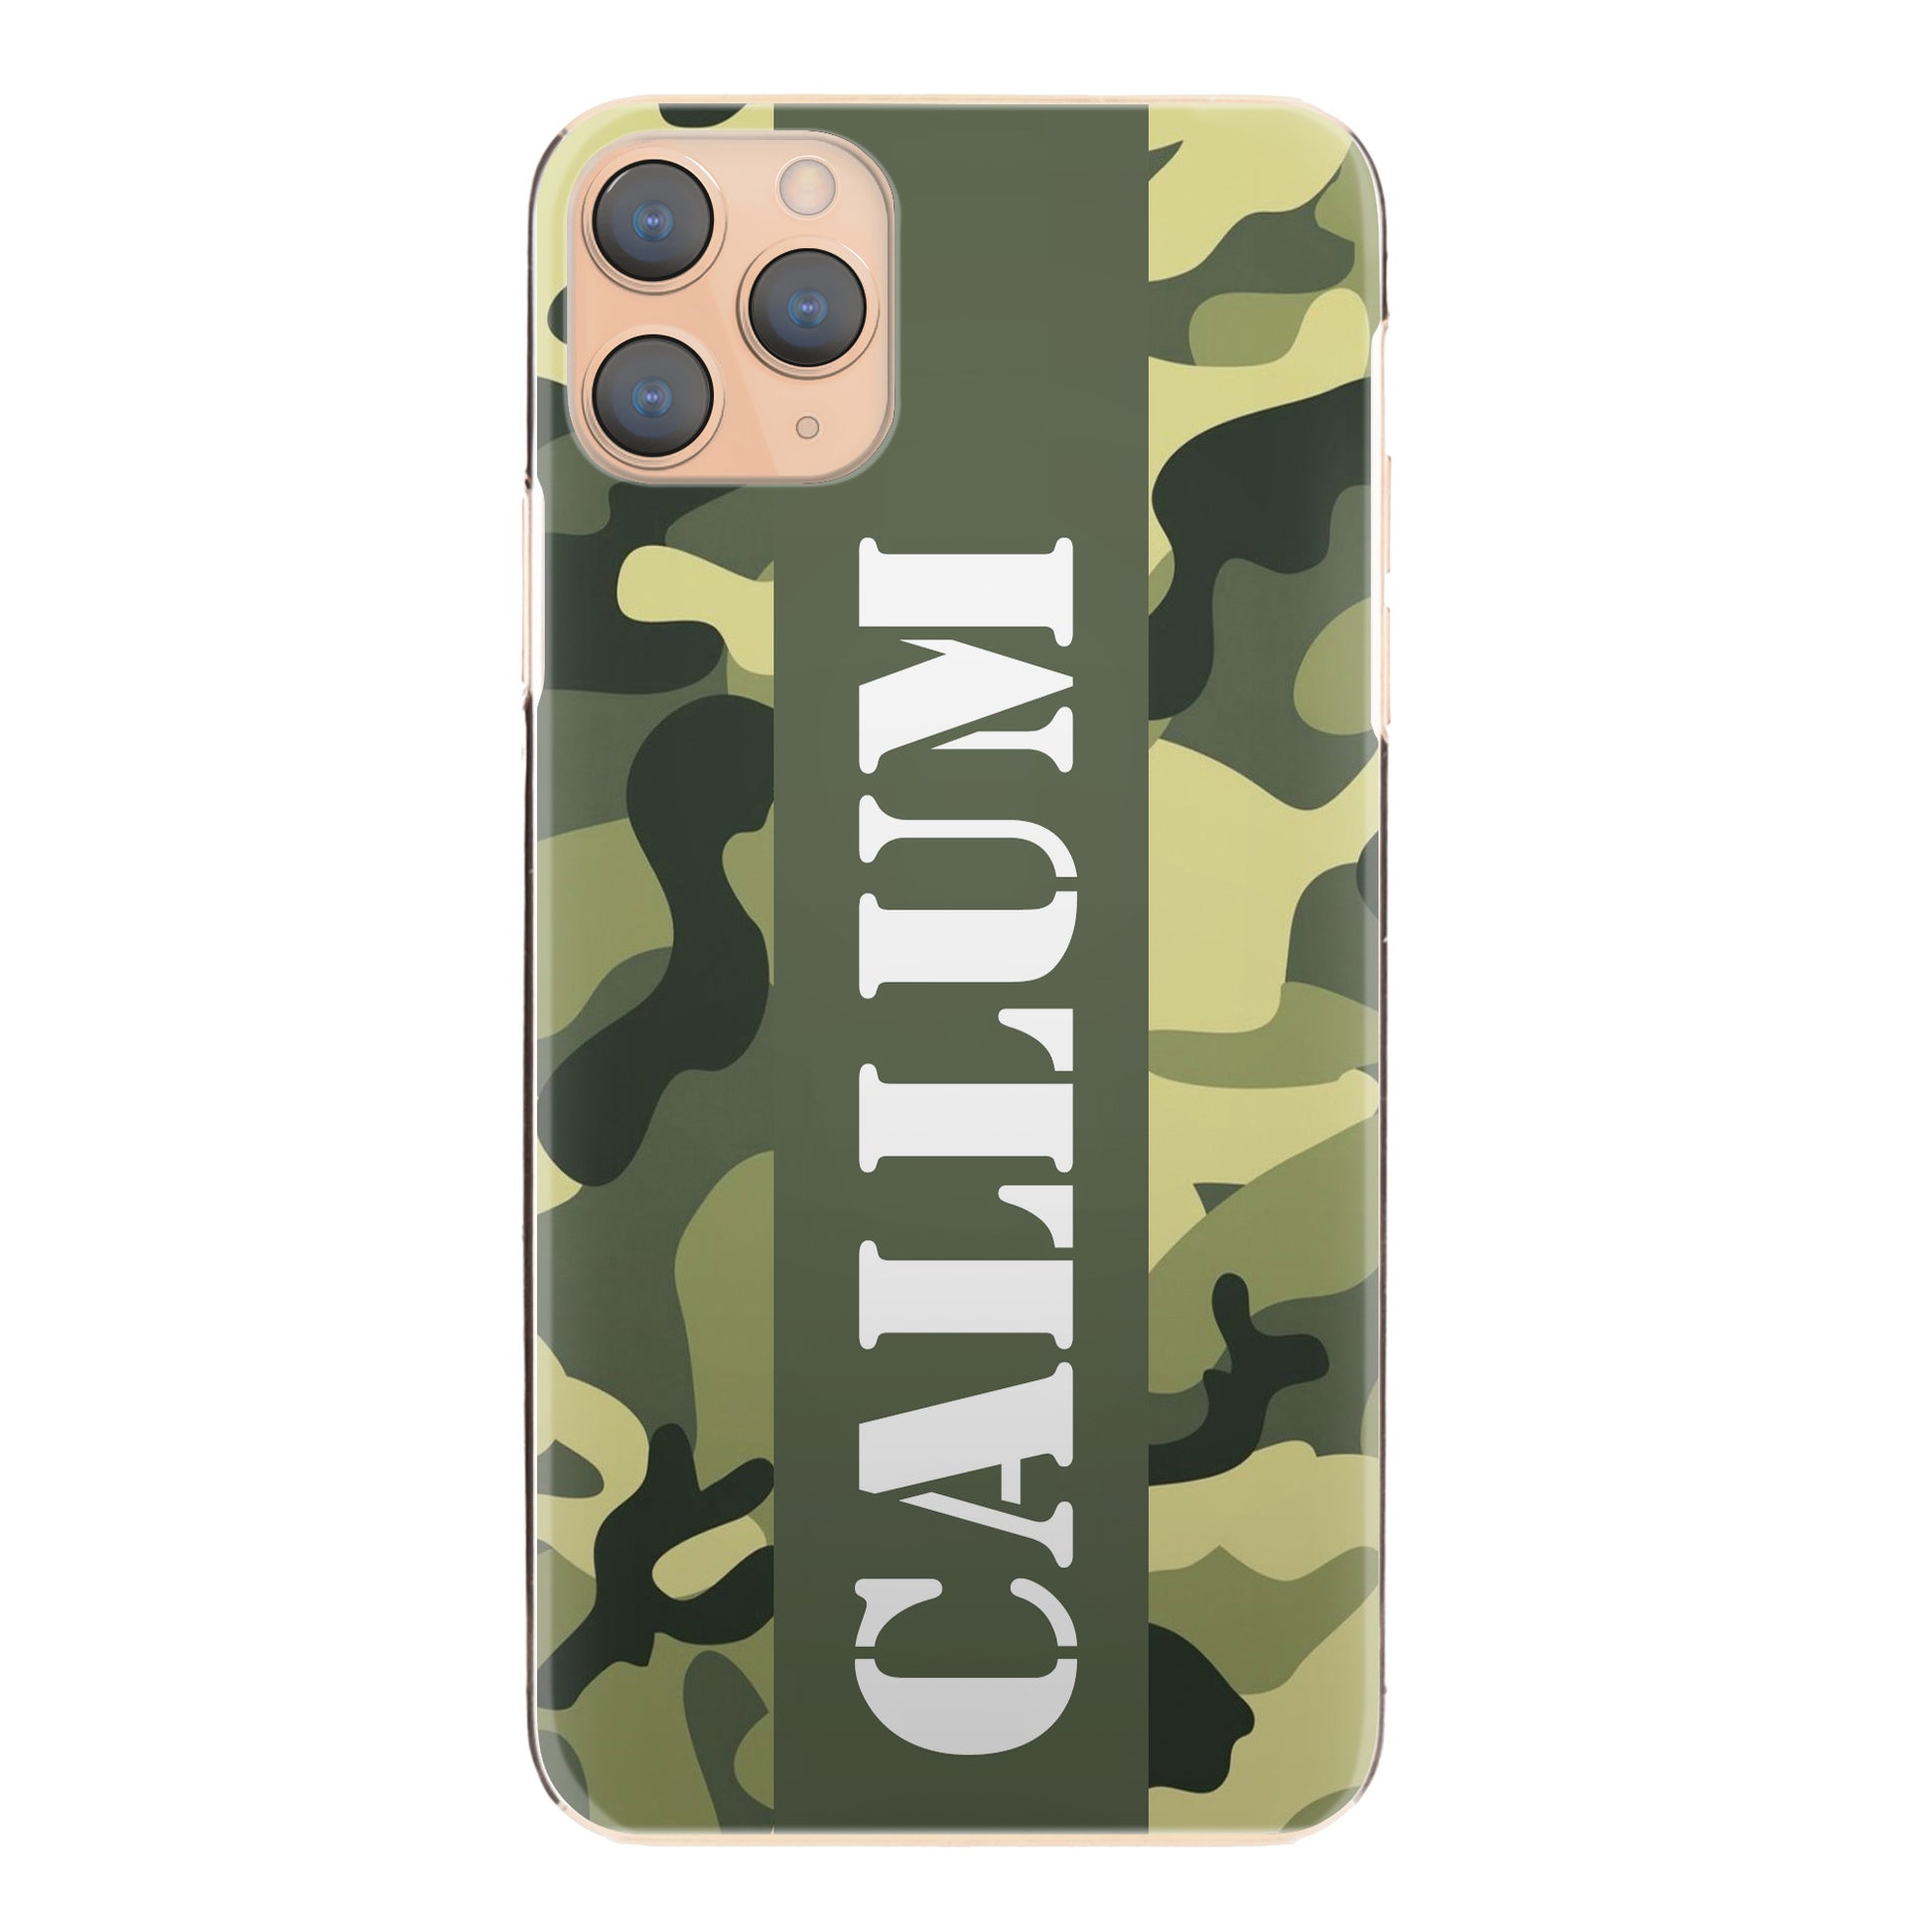 Personalised HTC Phone Hard Case with Military Text on Classic Green Camo